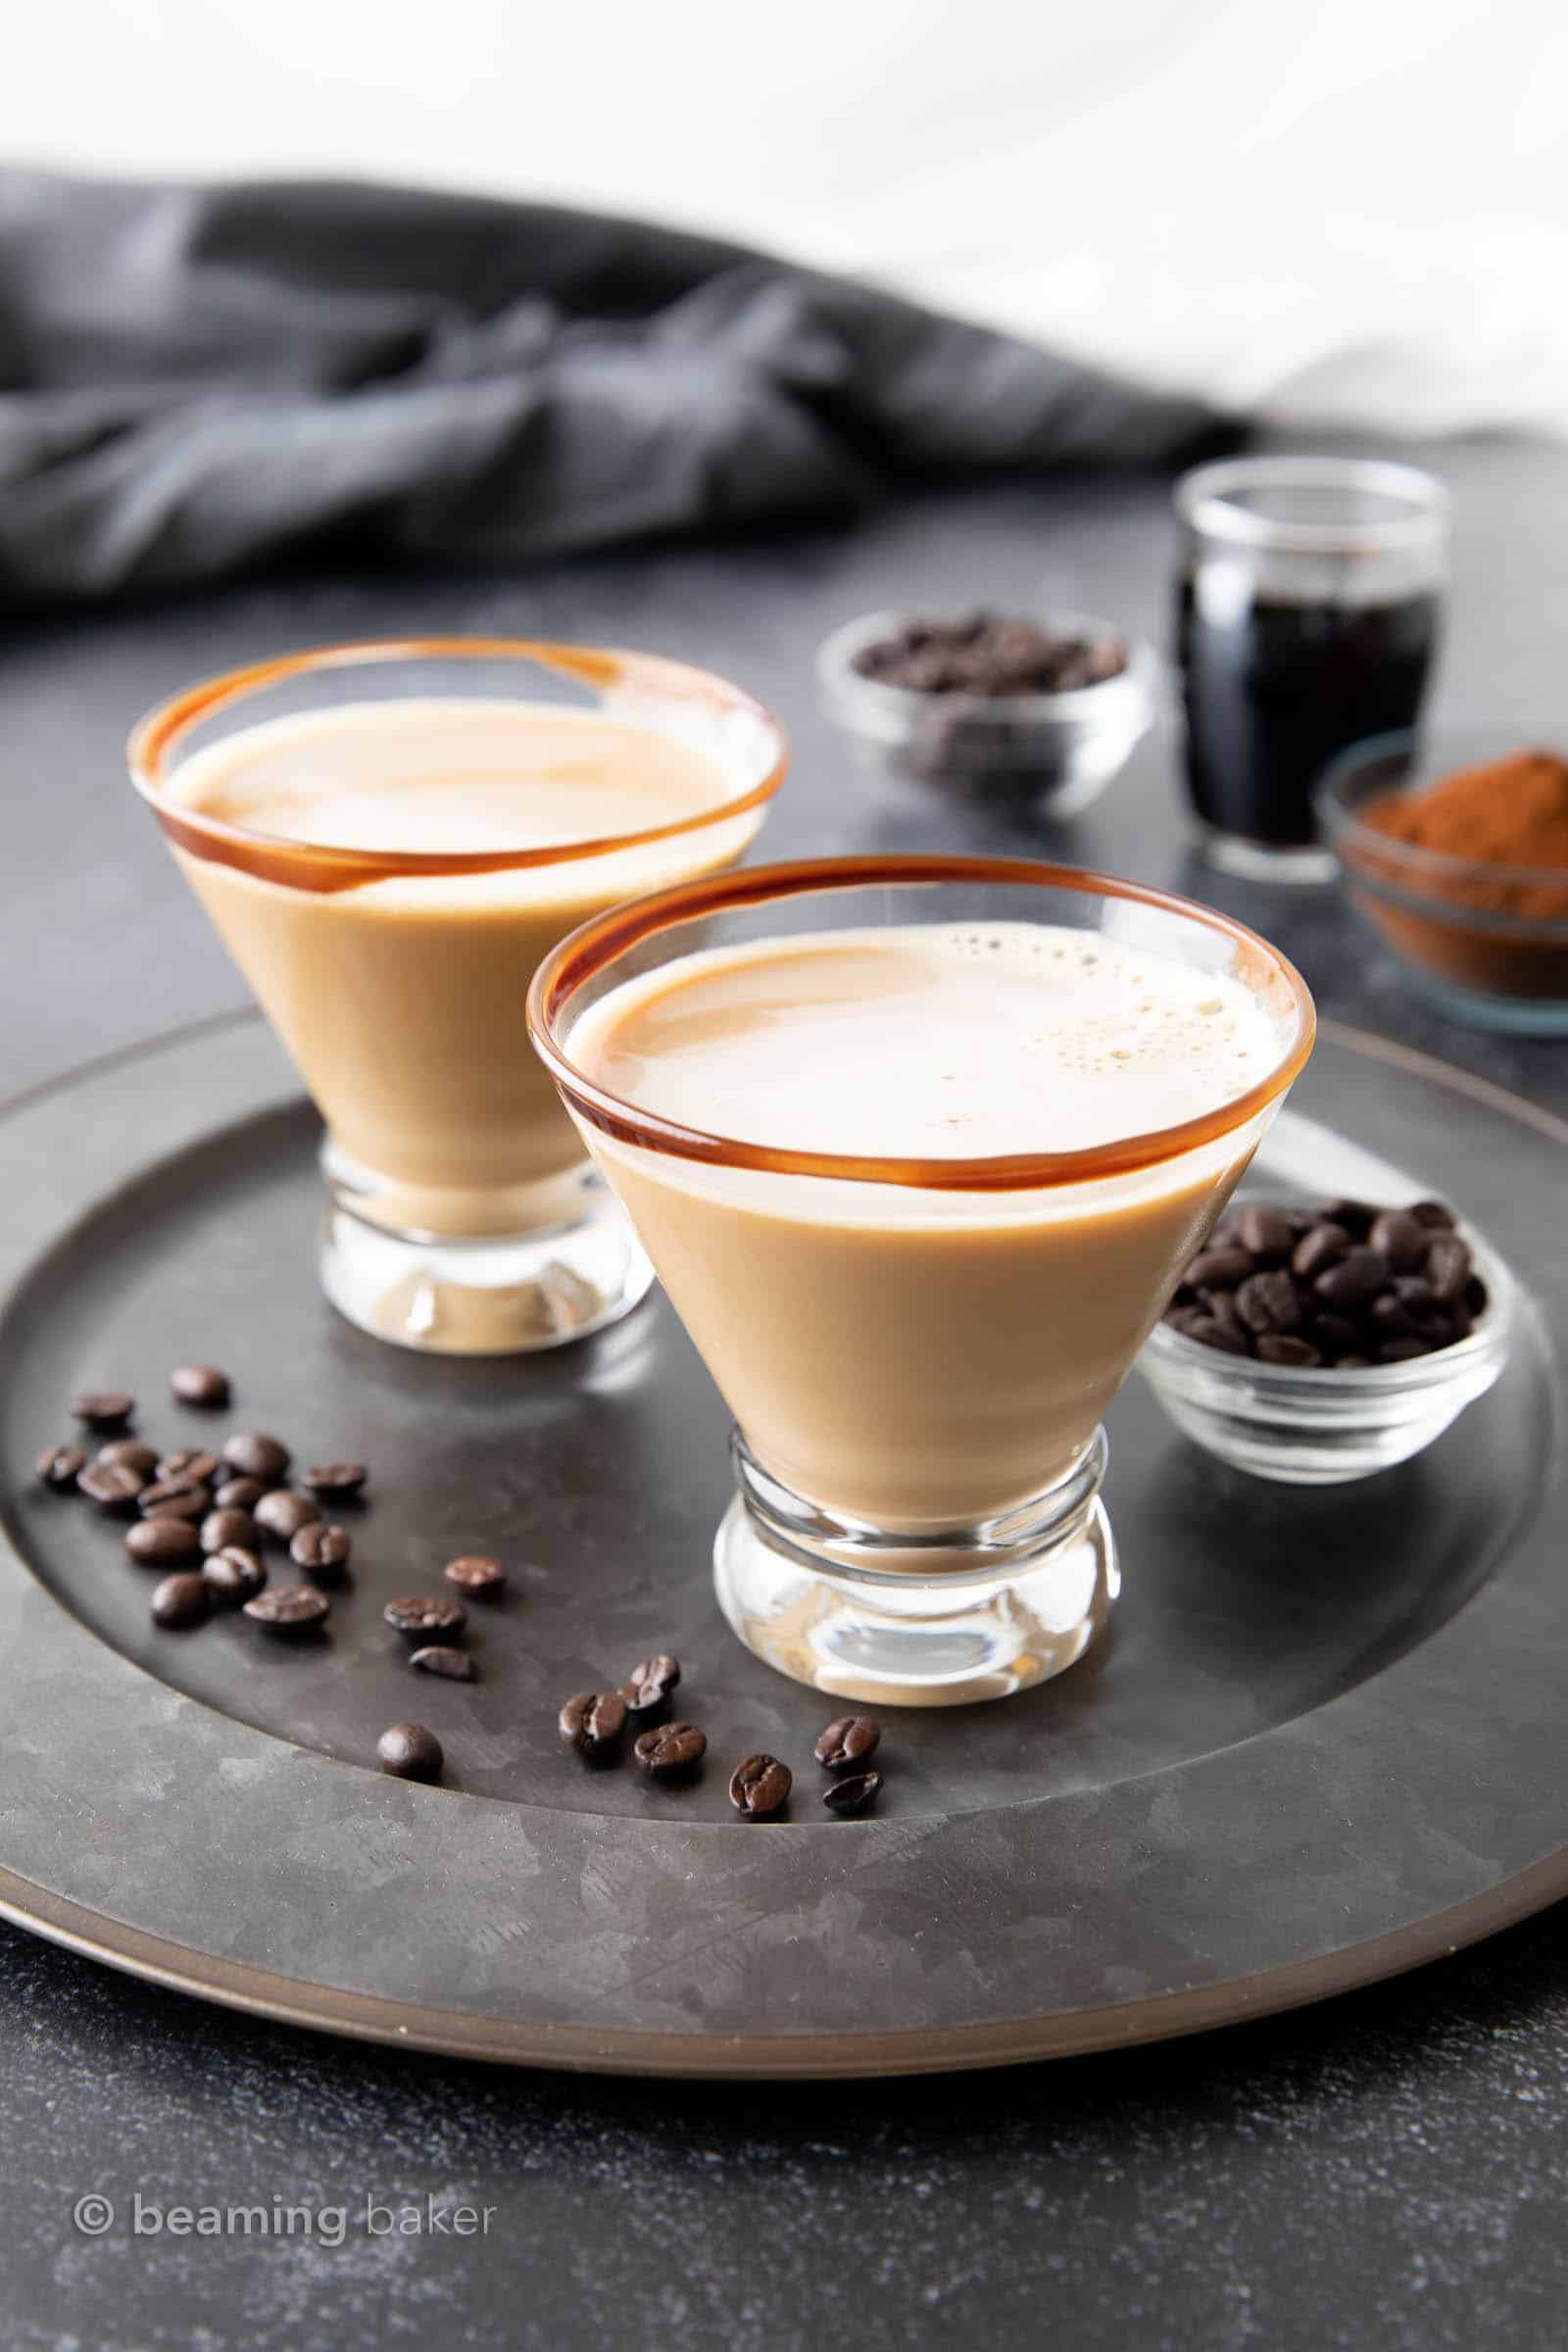 Two chocolate espresso martinis served on a plate with coffee beans